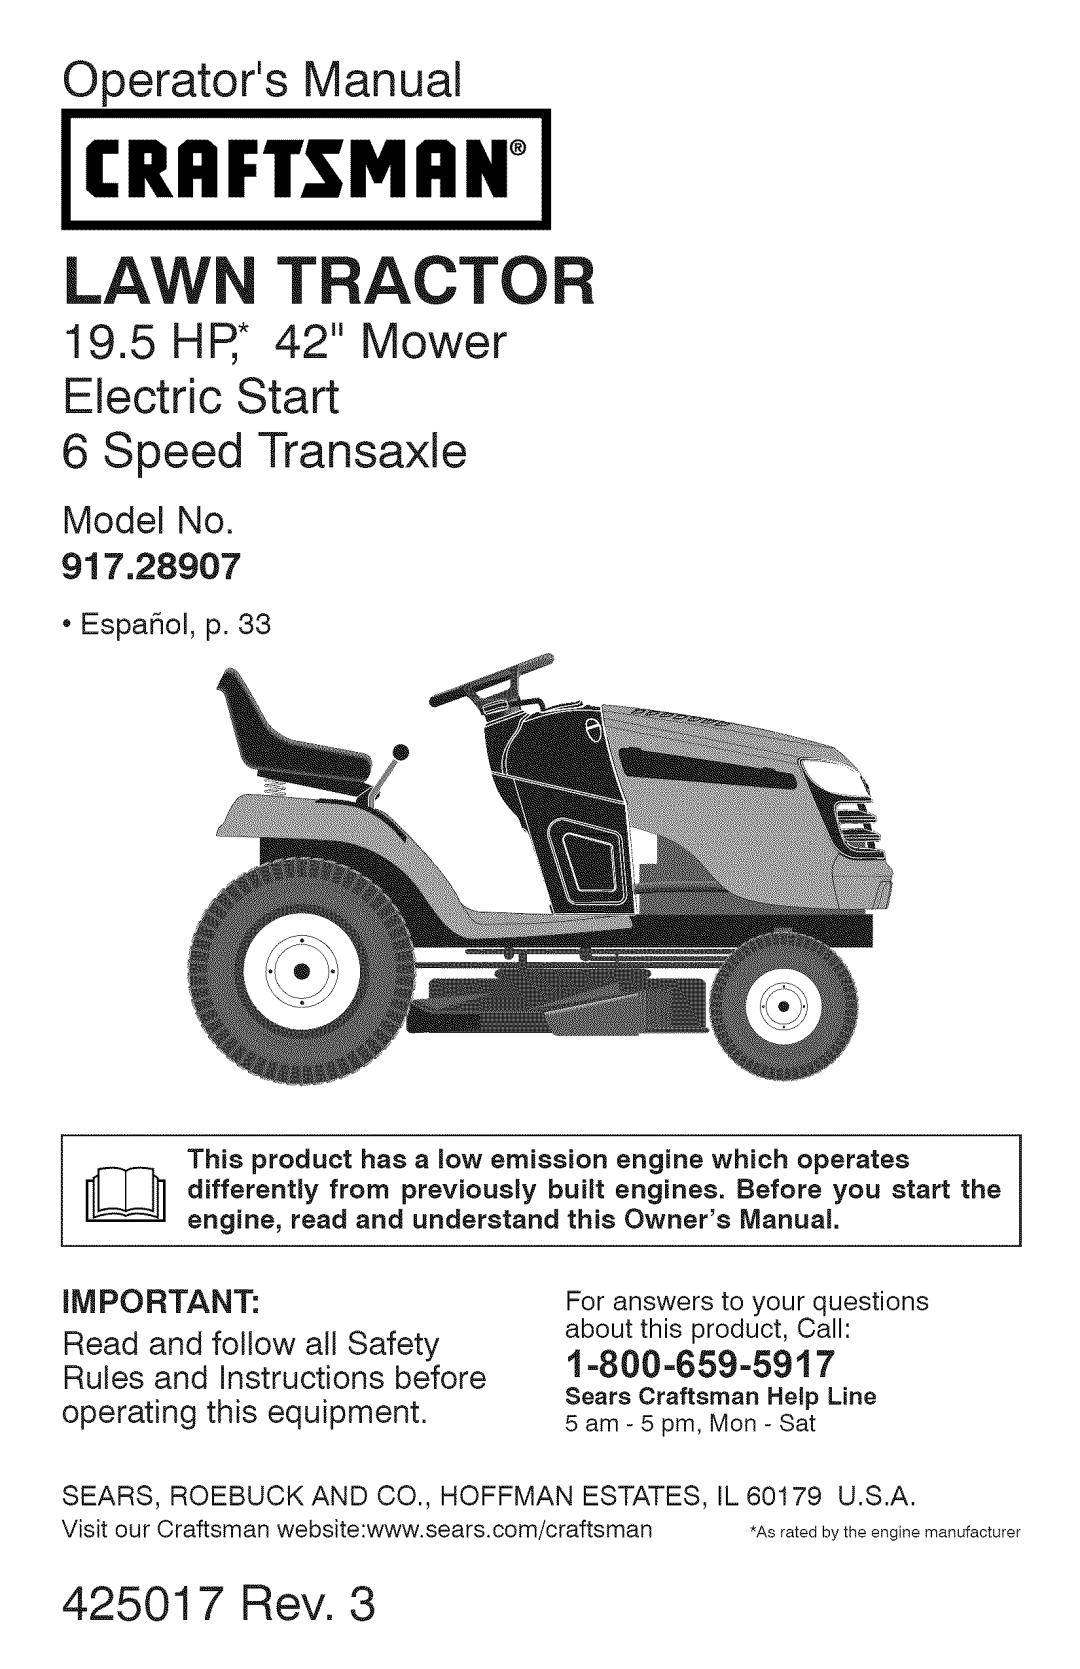 Craftsman 917.28907 owner manual Law Tractor, Operators Manual, 19.5HR* 42 Mower Electric Start 6 Speed Transaxle 